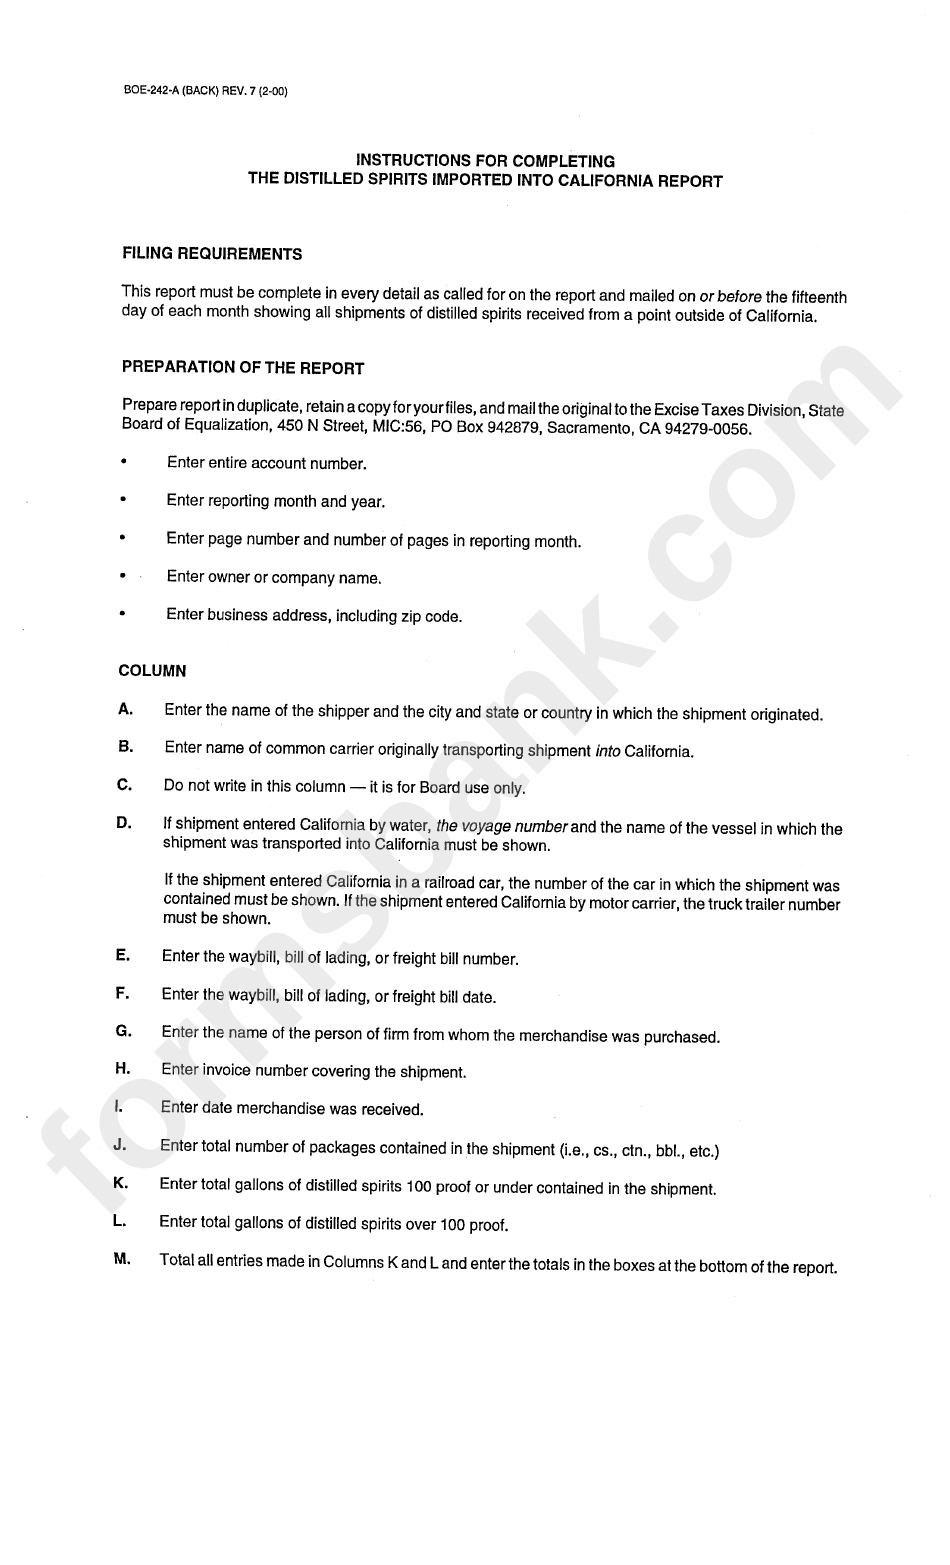 Form Boe-242-A - Instructions For Completing The Distilled Spirits Imported Into California Reportt